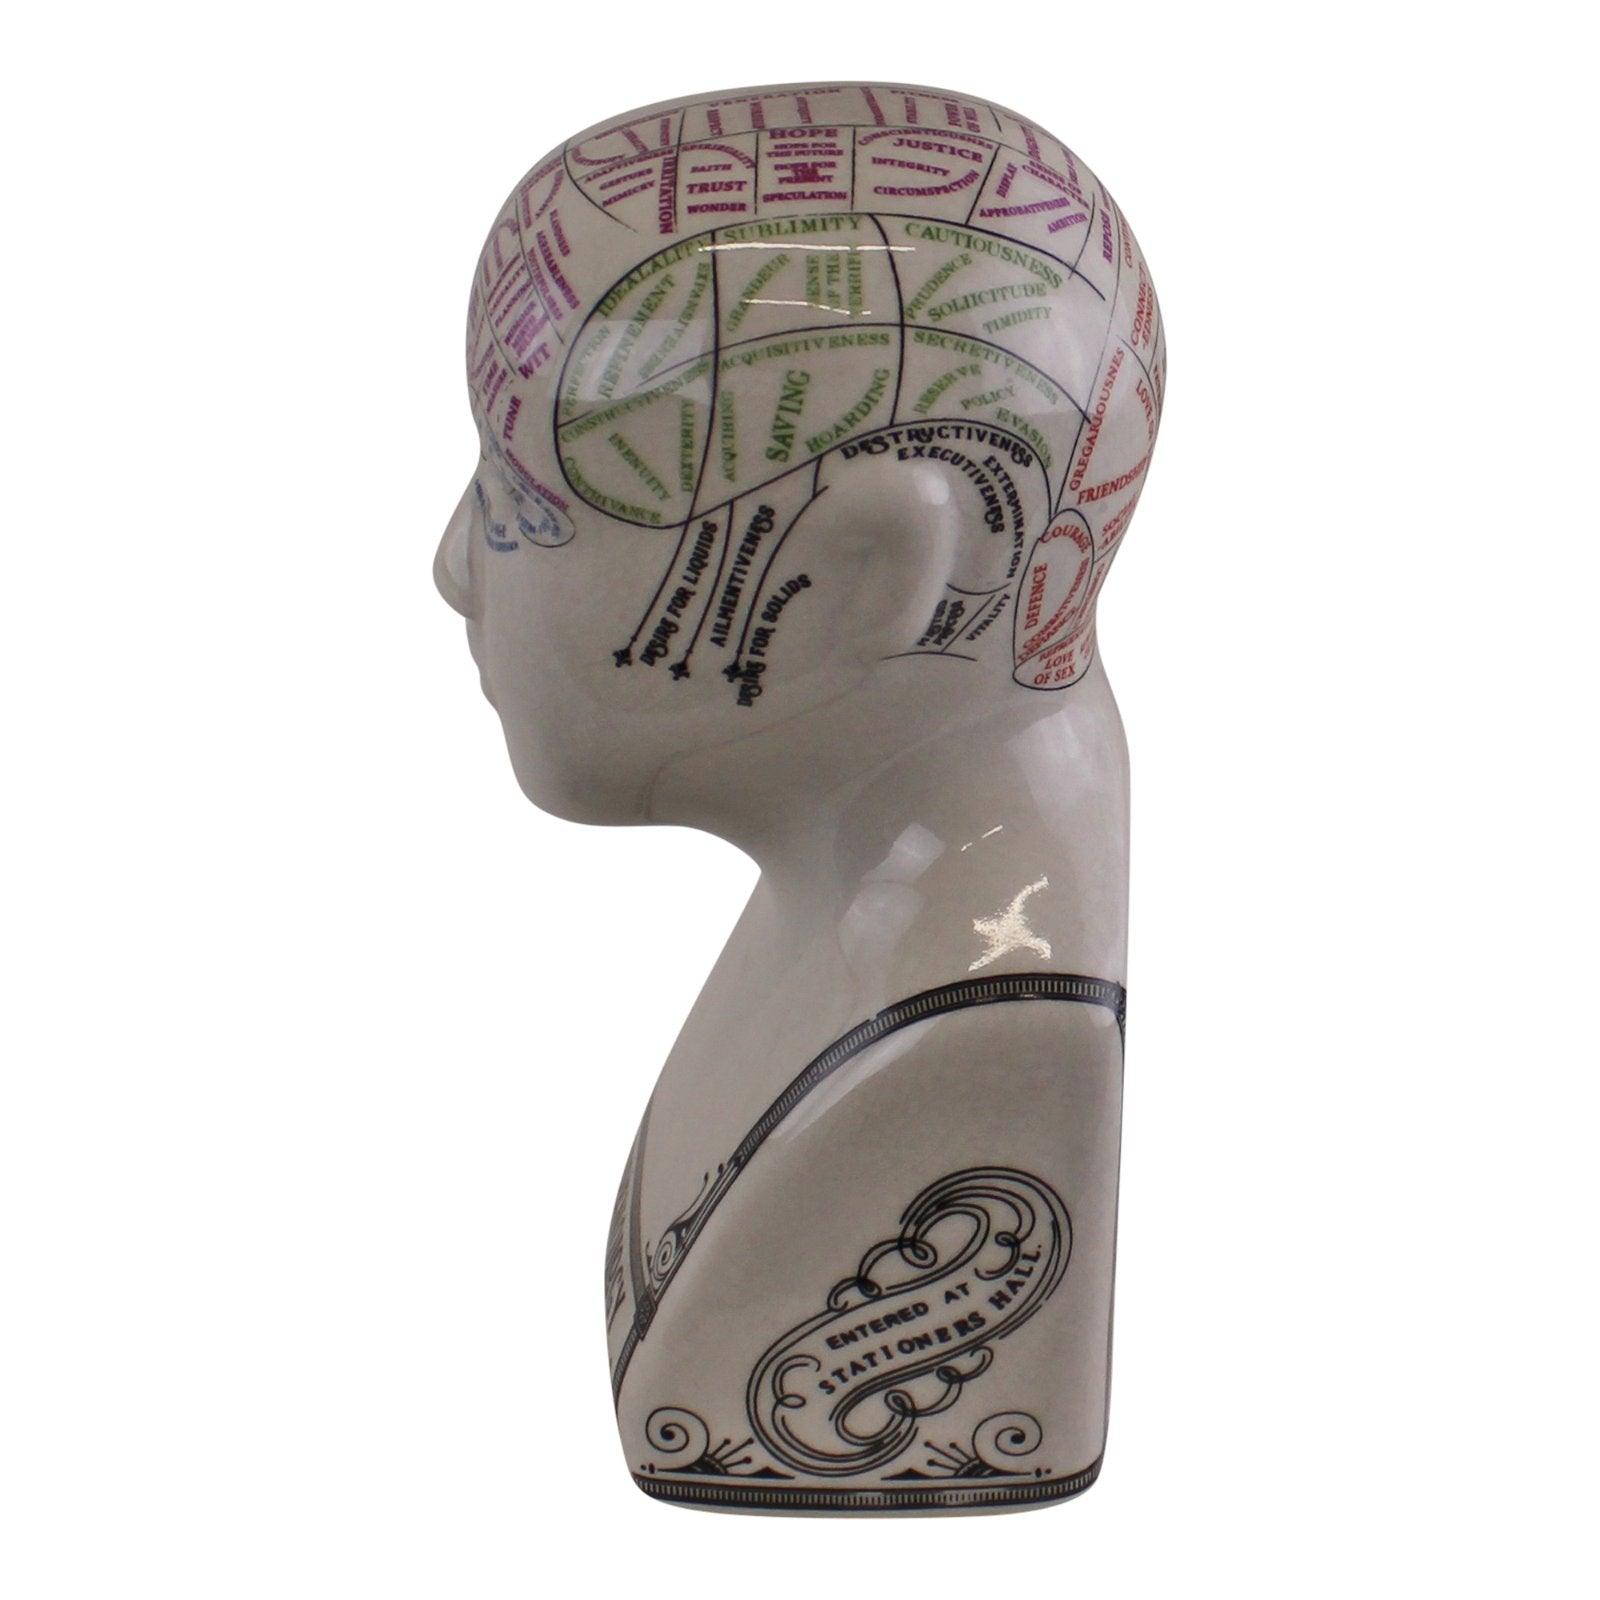 View Small Ceramic Crackle Phrenology Head information